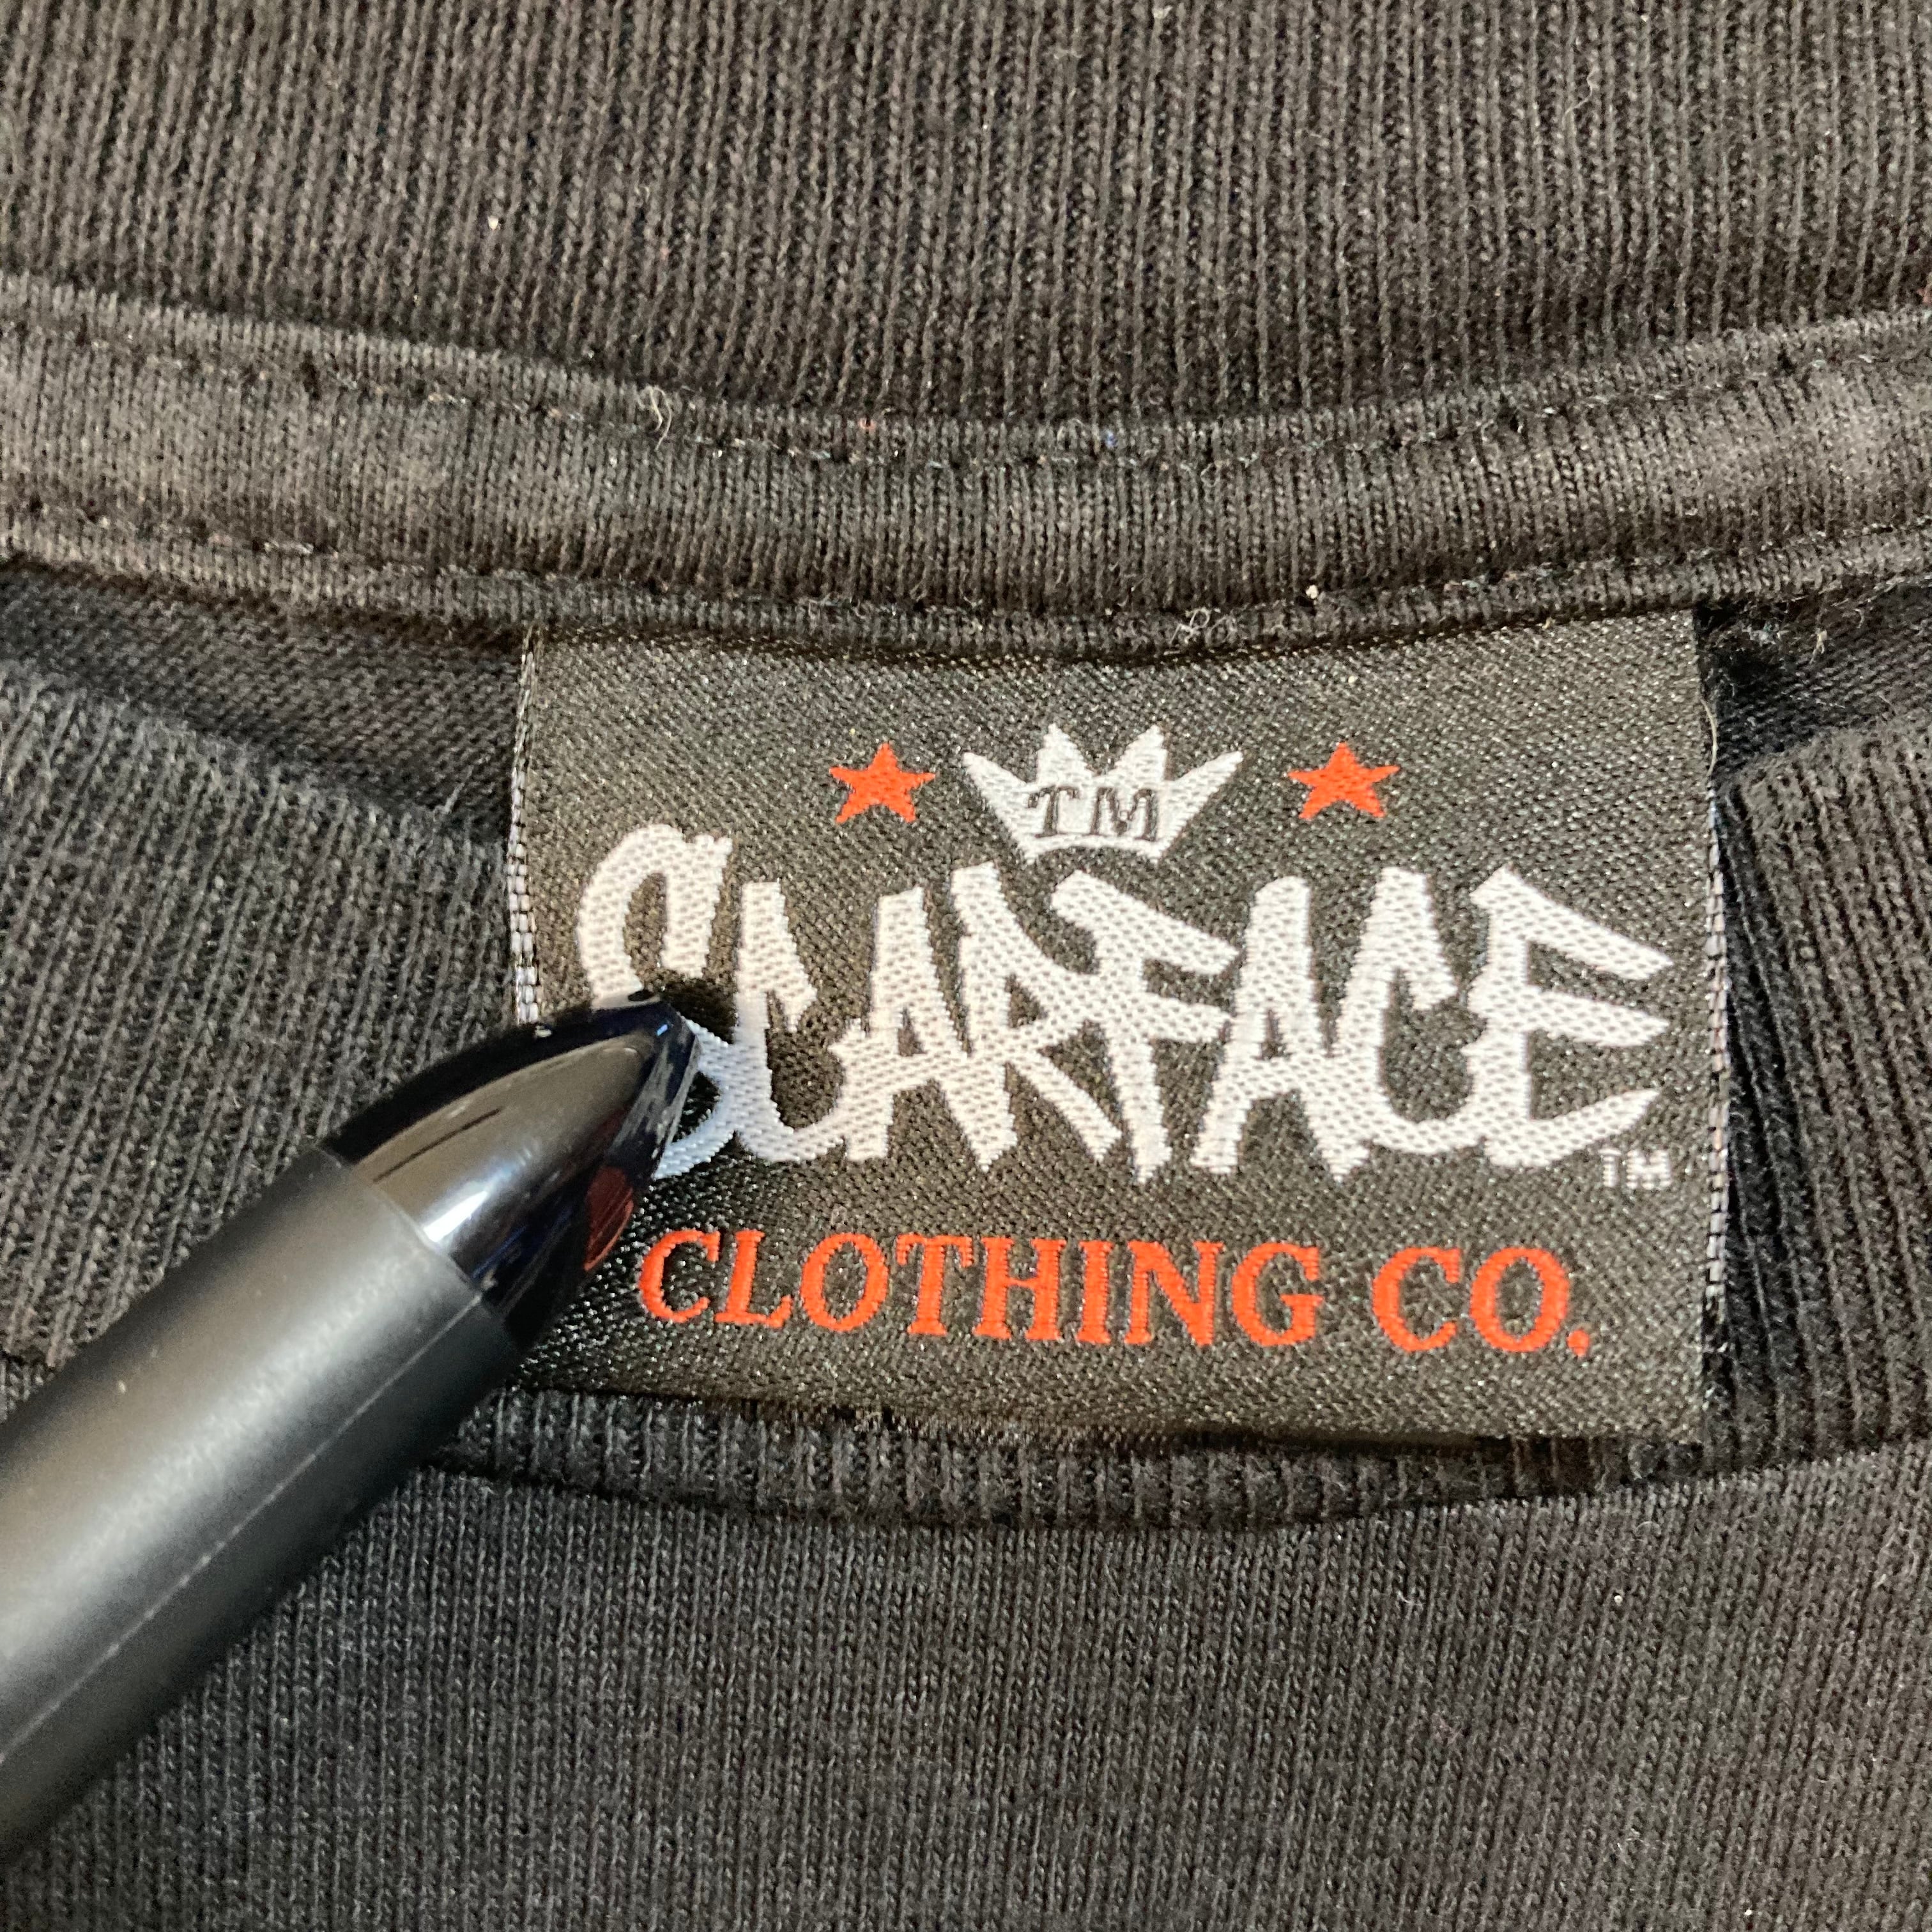 SCARFACECLOTHING CO.】S/S Tee XL Made in Canada “SCAR FACE